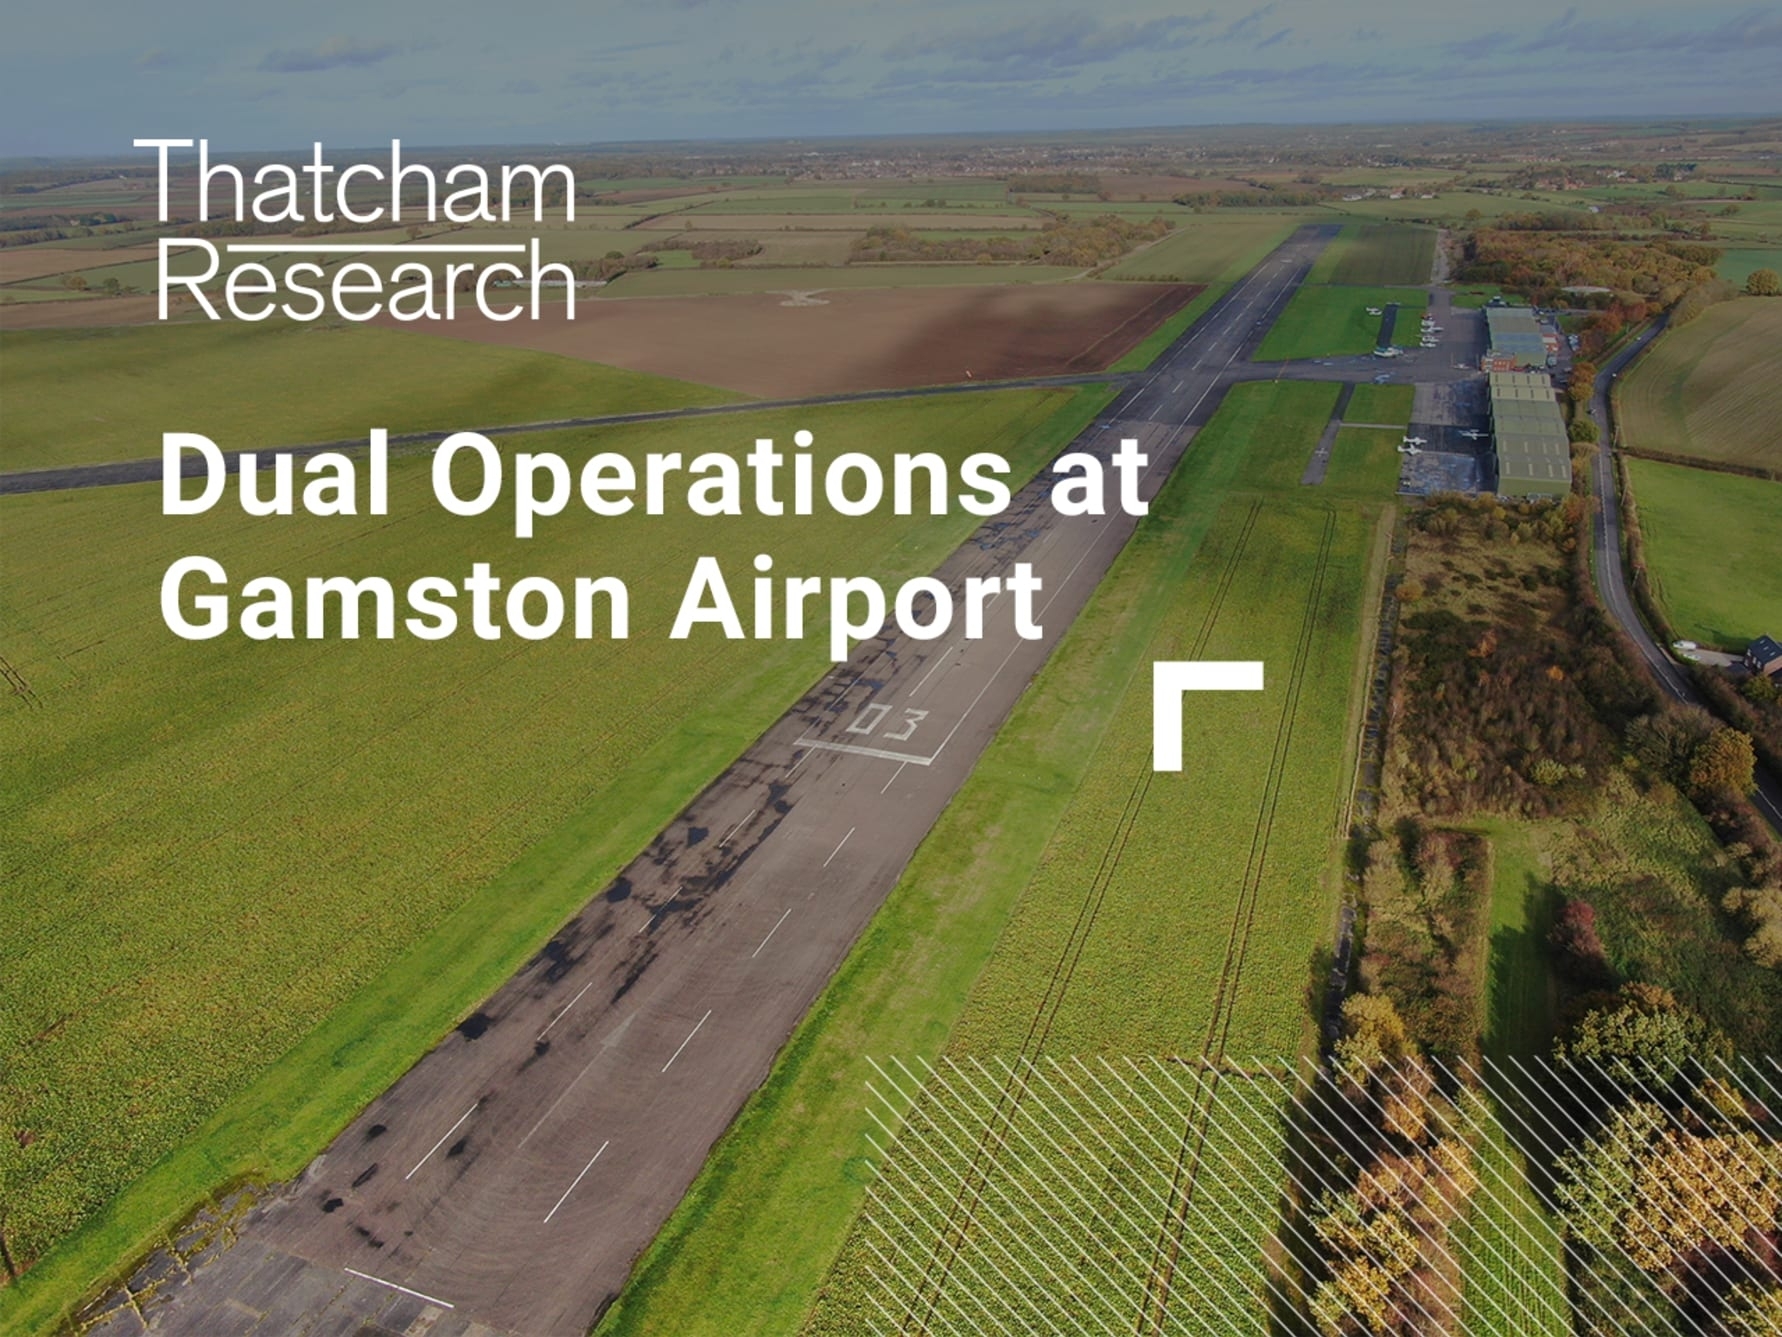 Dual Operations Gamston Airport